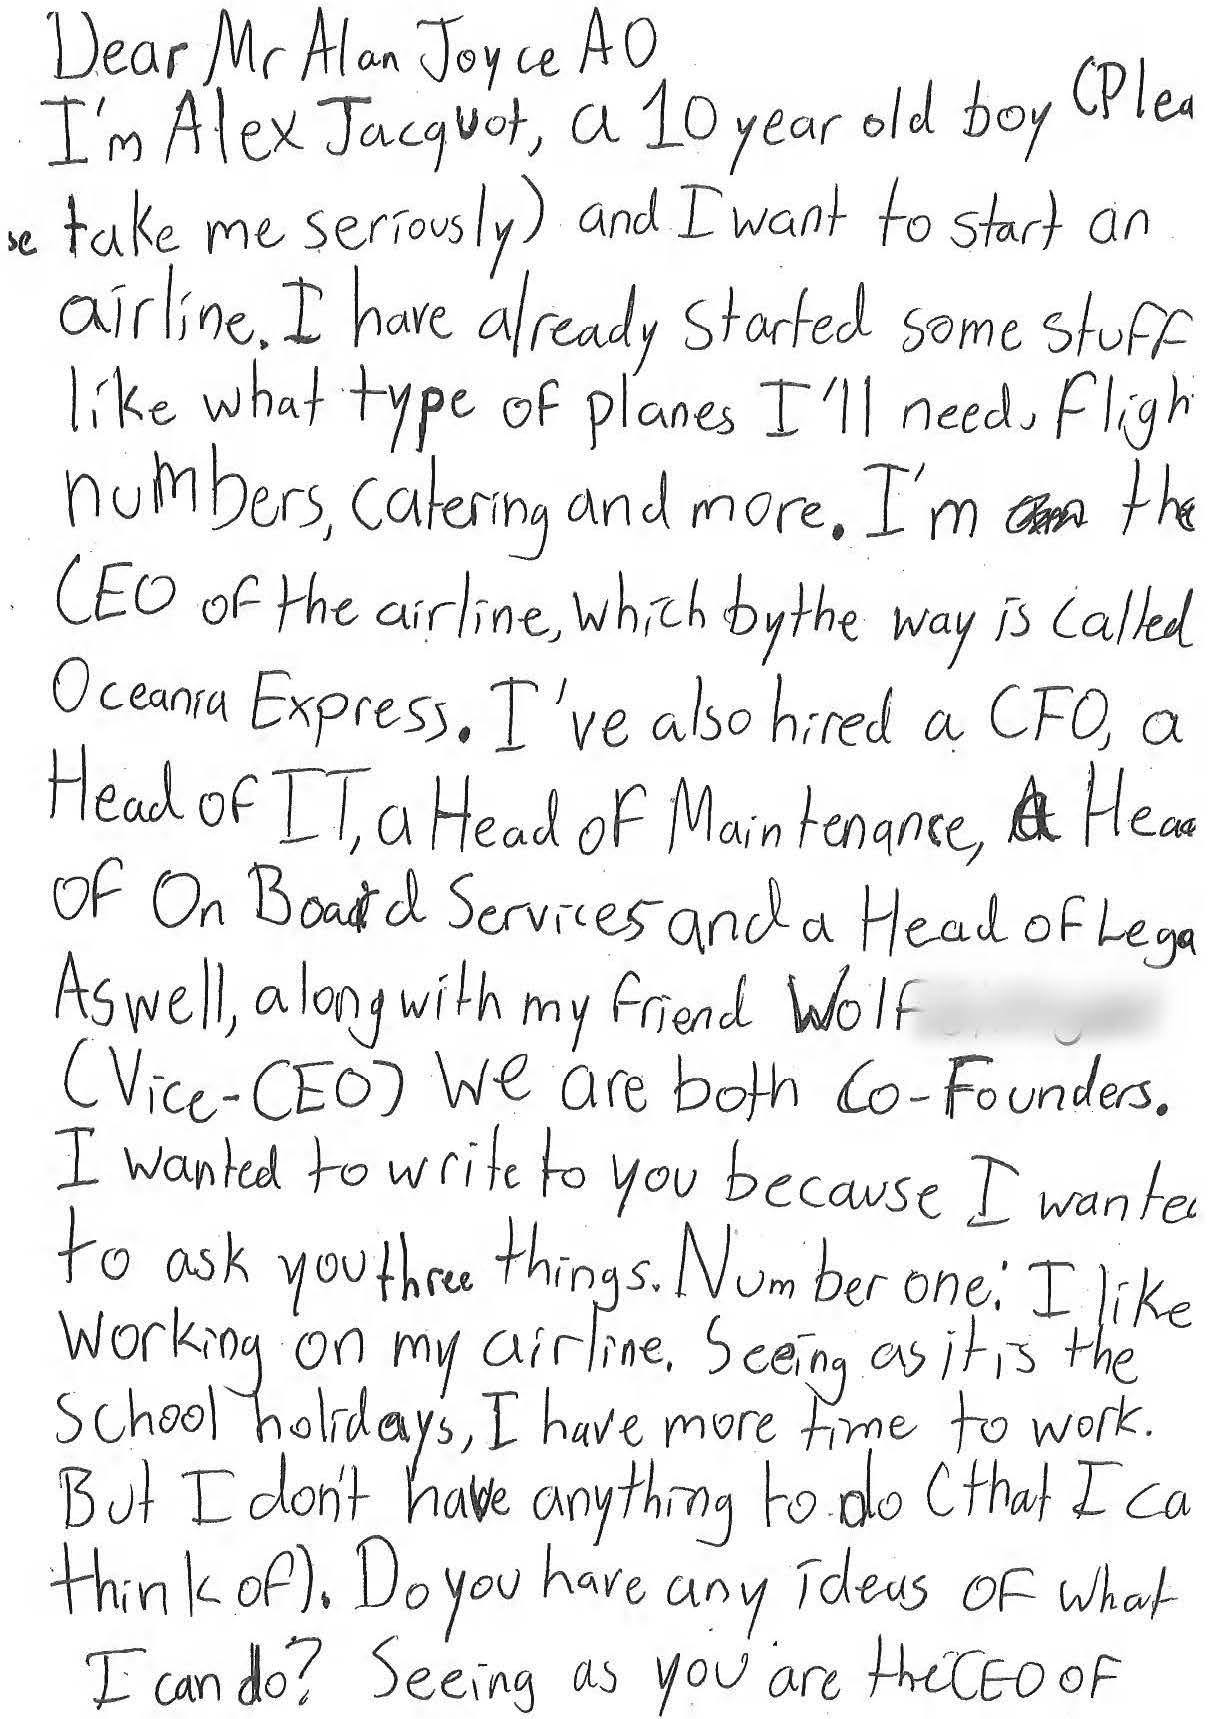 Airline CEO responds to adorable letter from 9-year-old Alex